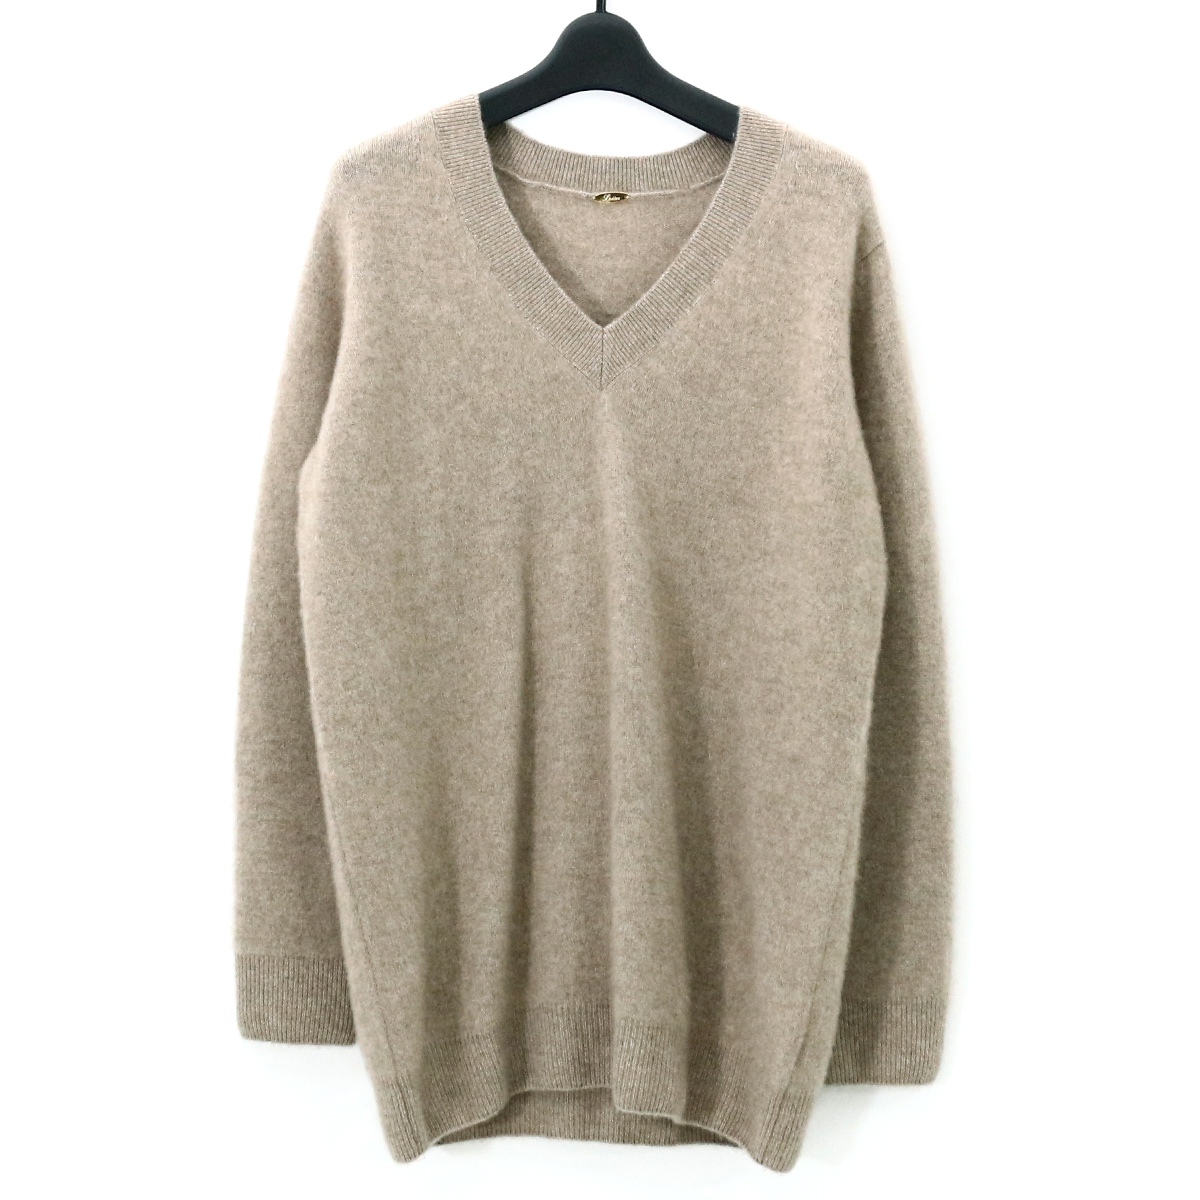 L'Appartement Lisiere アパルトモン リジエール 19AW Cashmere VN KNIT カシミヤVネックニットセーター 19080560010730